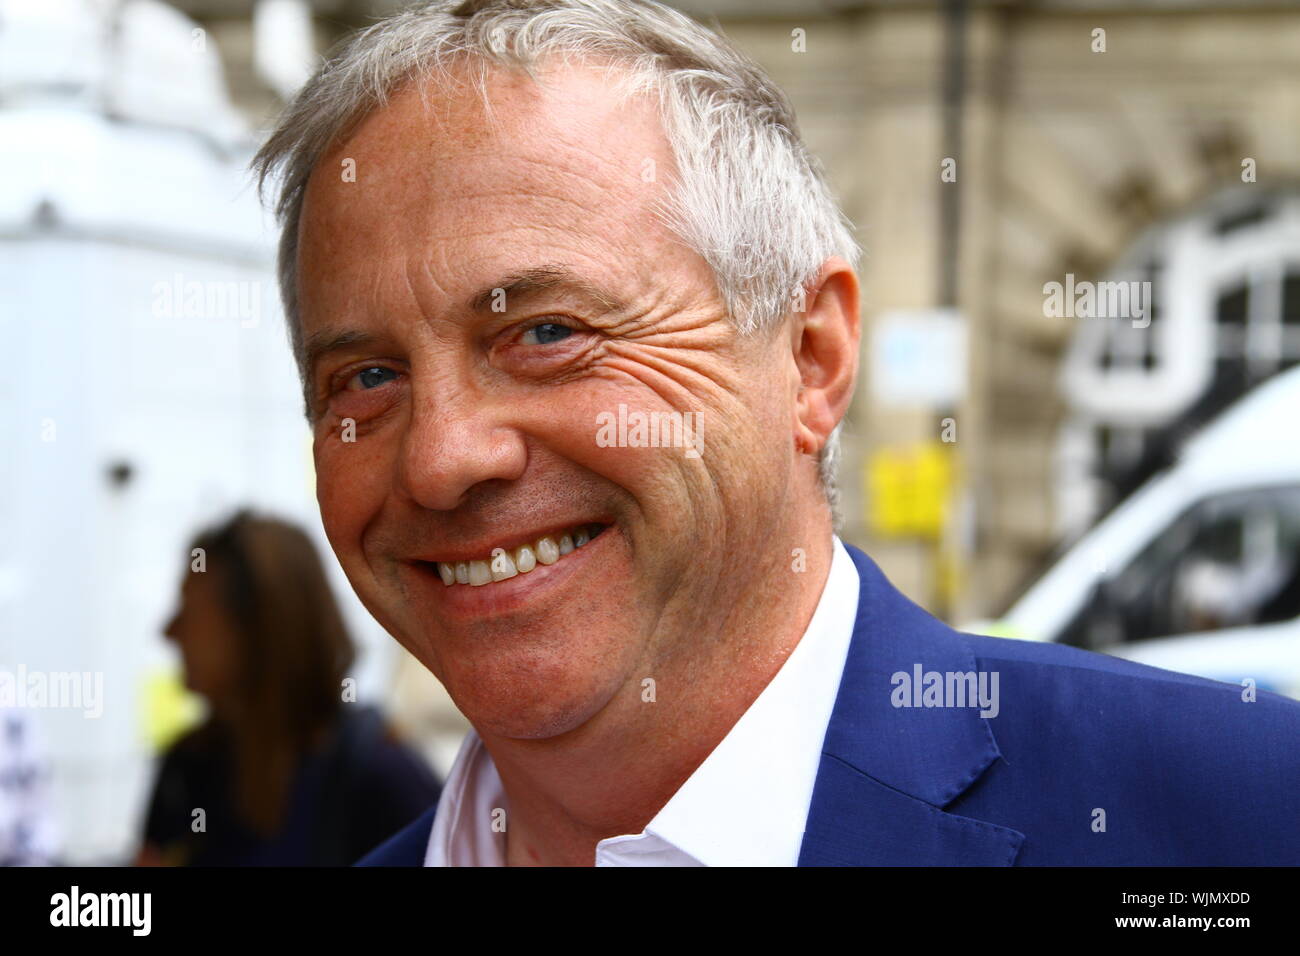 JOHN MANN LABOUR PARTY MP FOR BASSETLAW PICTURED AT COLLEGE GREEN , WESTMINSTER ON 3RD SEPTEMBER 2019. BRITISH POLITICIANS. LABOUR MPS. POLITICS. OPPOSTION PARTY. RUSSELL MOORE PORTFOLIO PAGE. Stock Photo